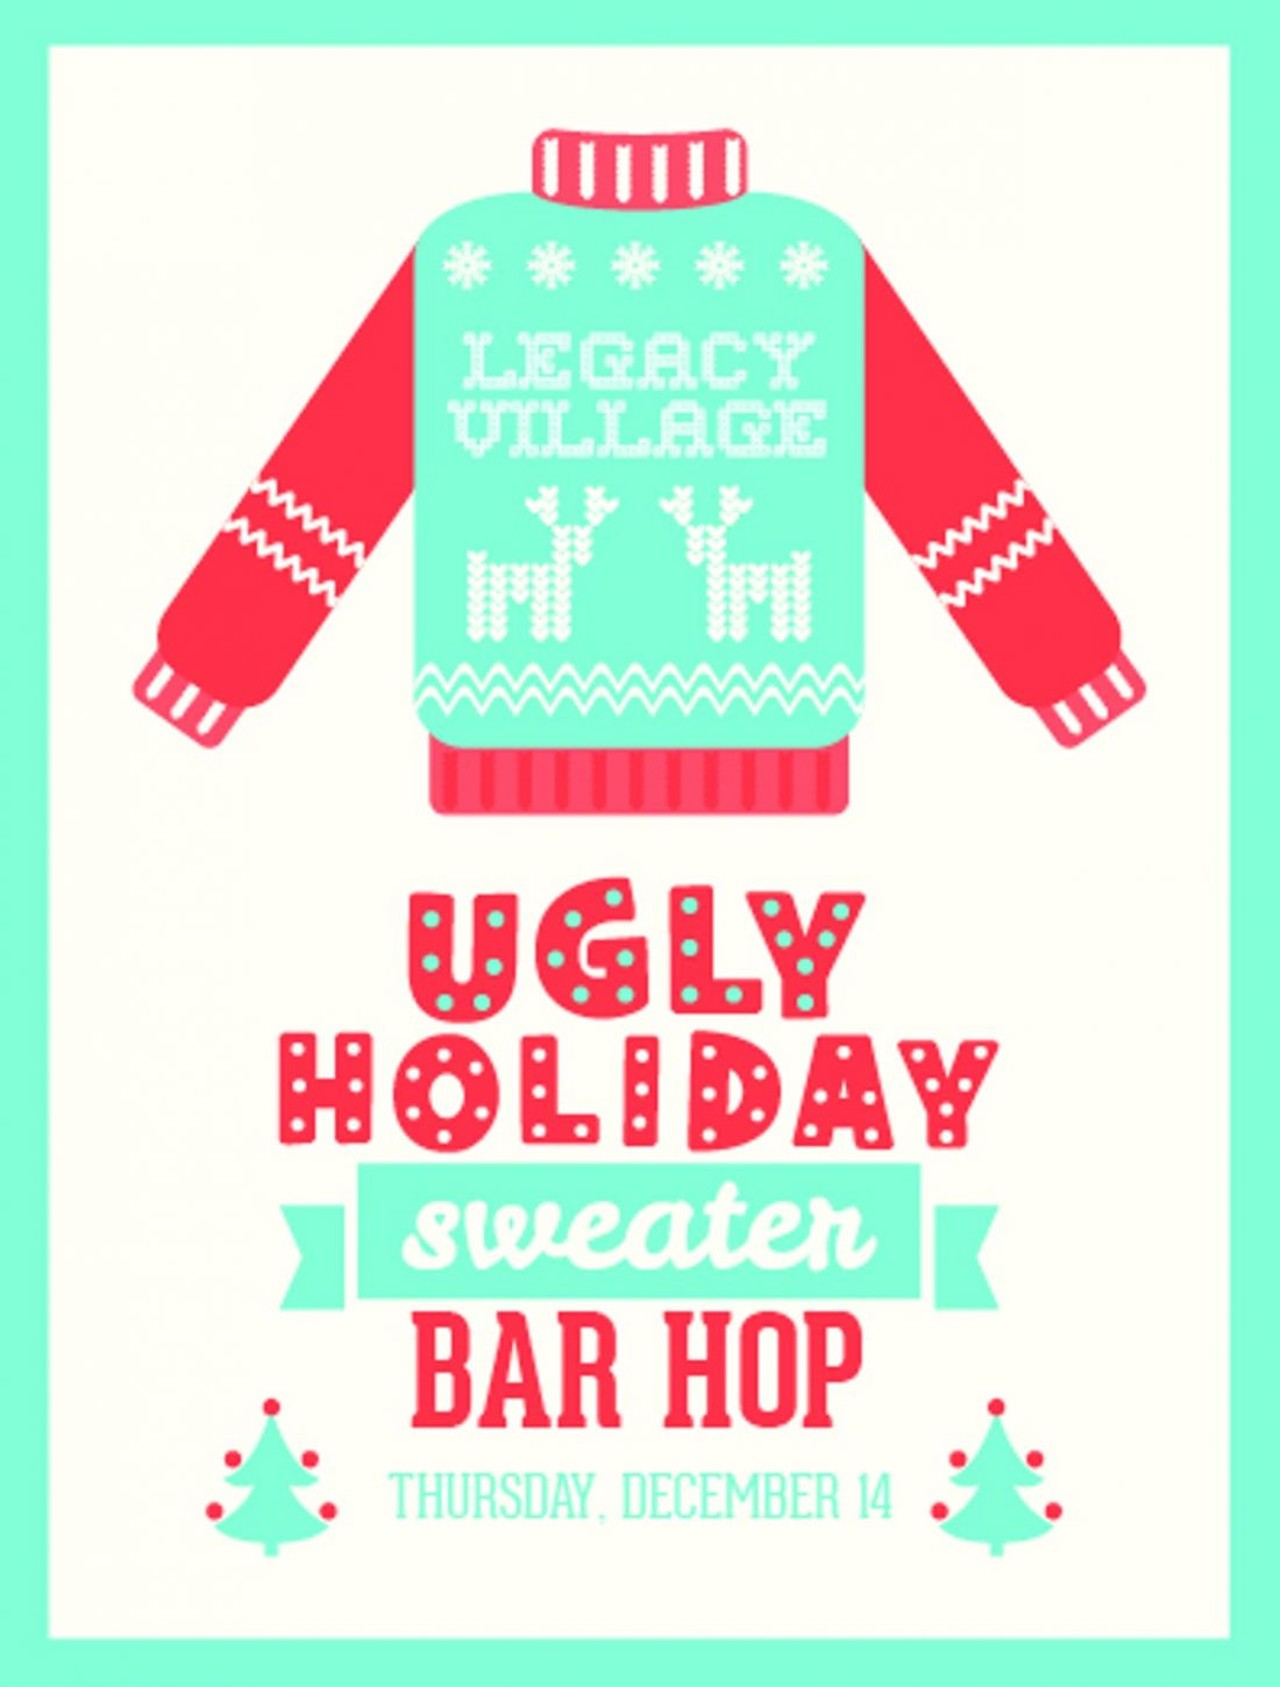 Ugly Holiday Sweater Bar Hop 
Thu, Dec. 14
Poster Art Provided